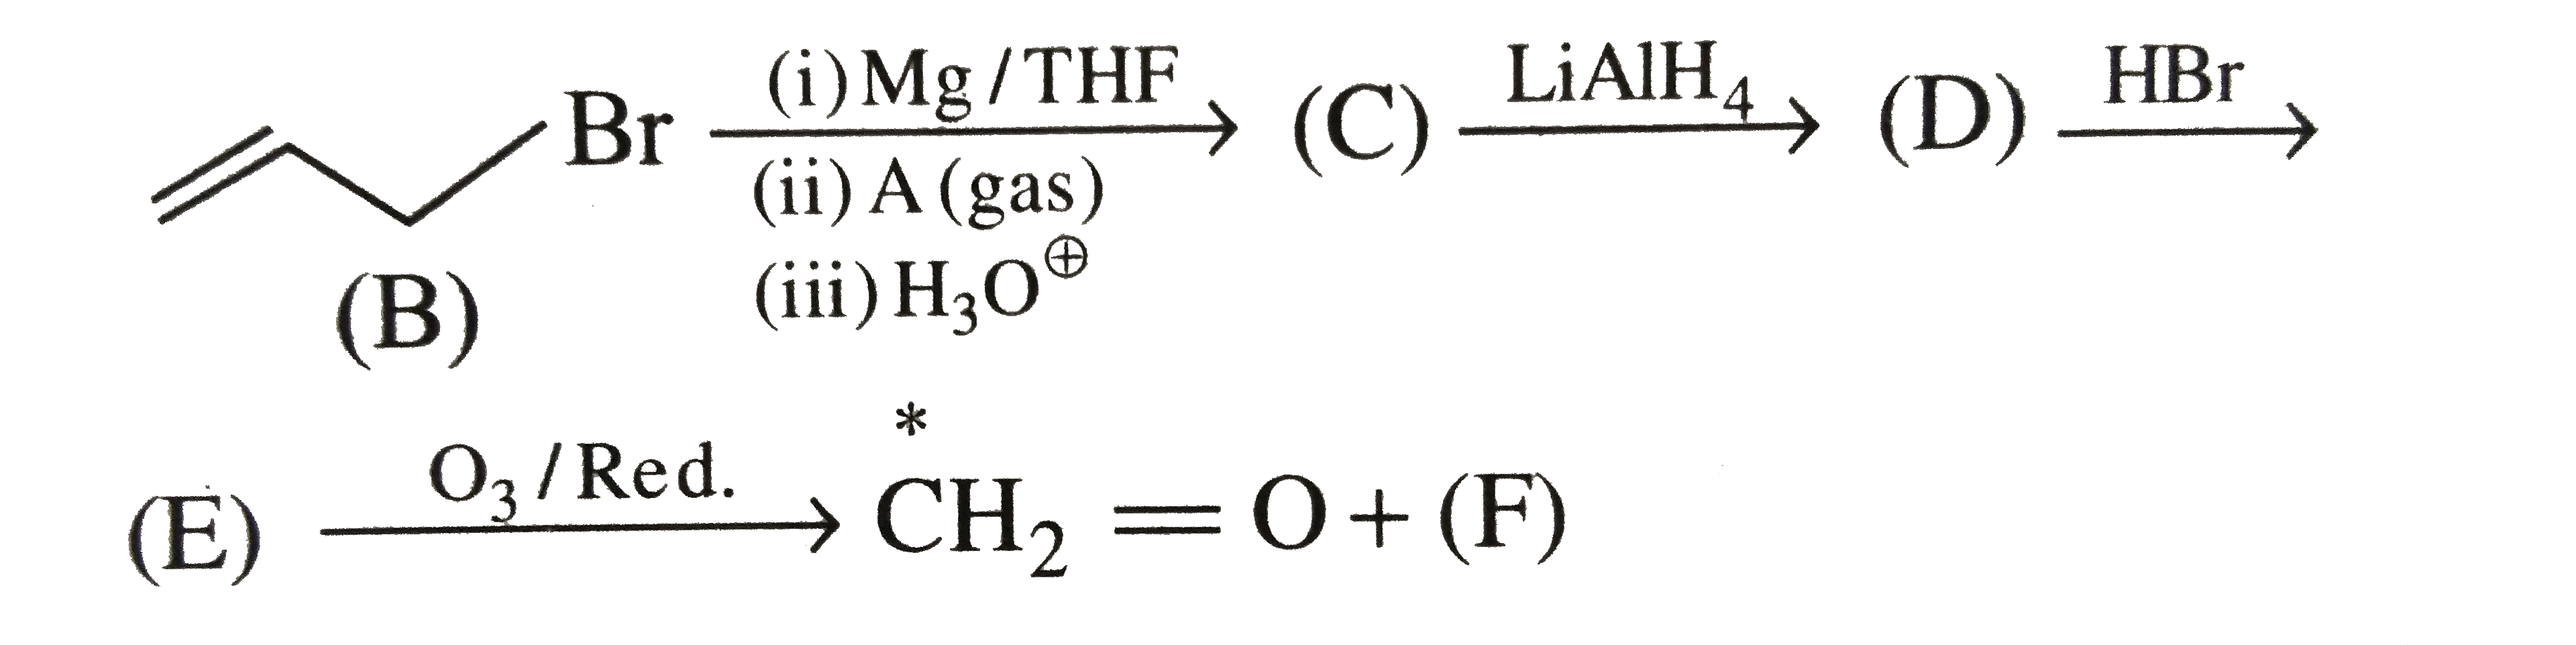 Identify (A) to (F) and mark the C^(**) carbon in the entire scheme Ca overset ** C O3 + H2 SO4 rarr (A) (gas) [C^** deno tes C^14].   .